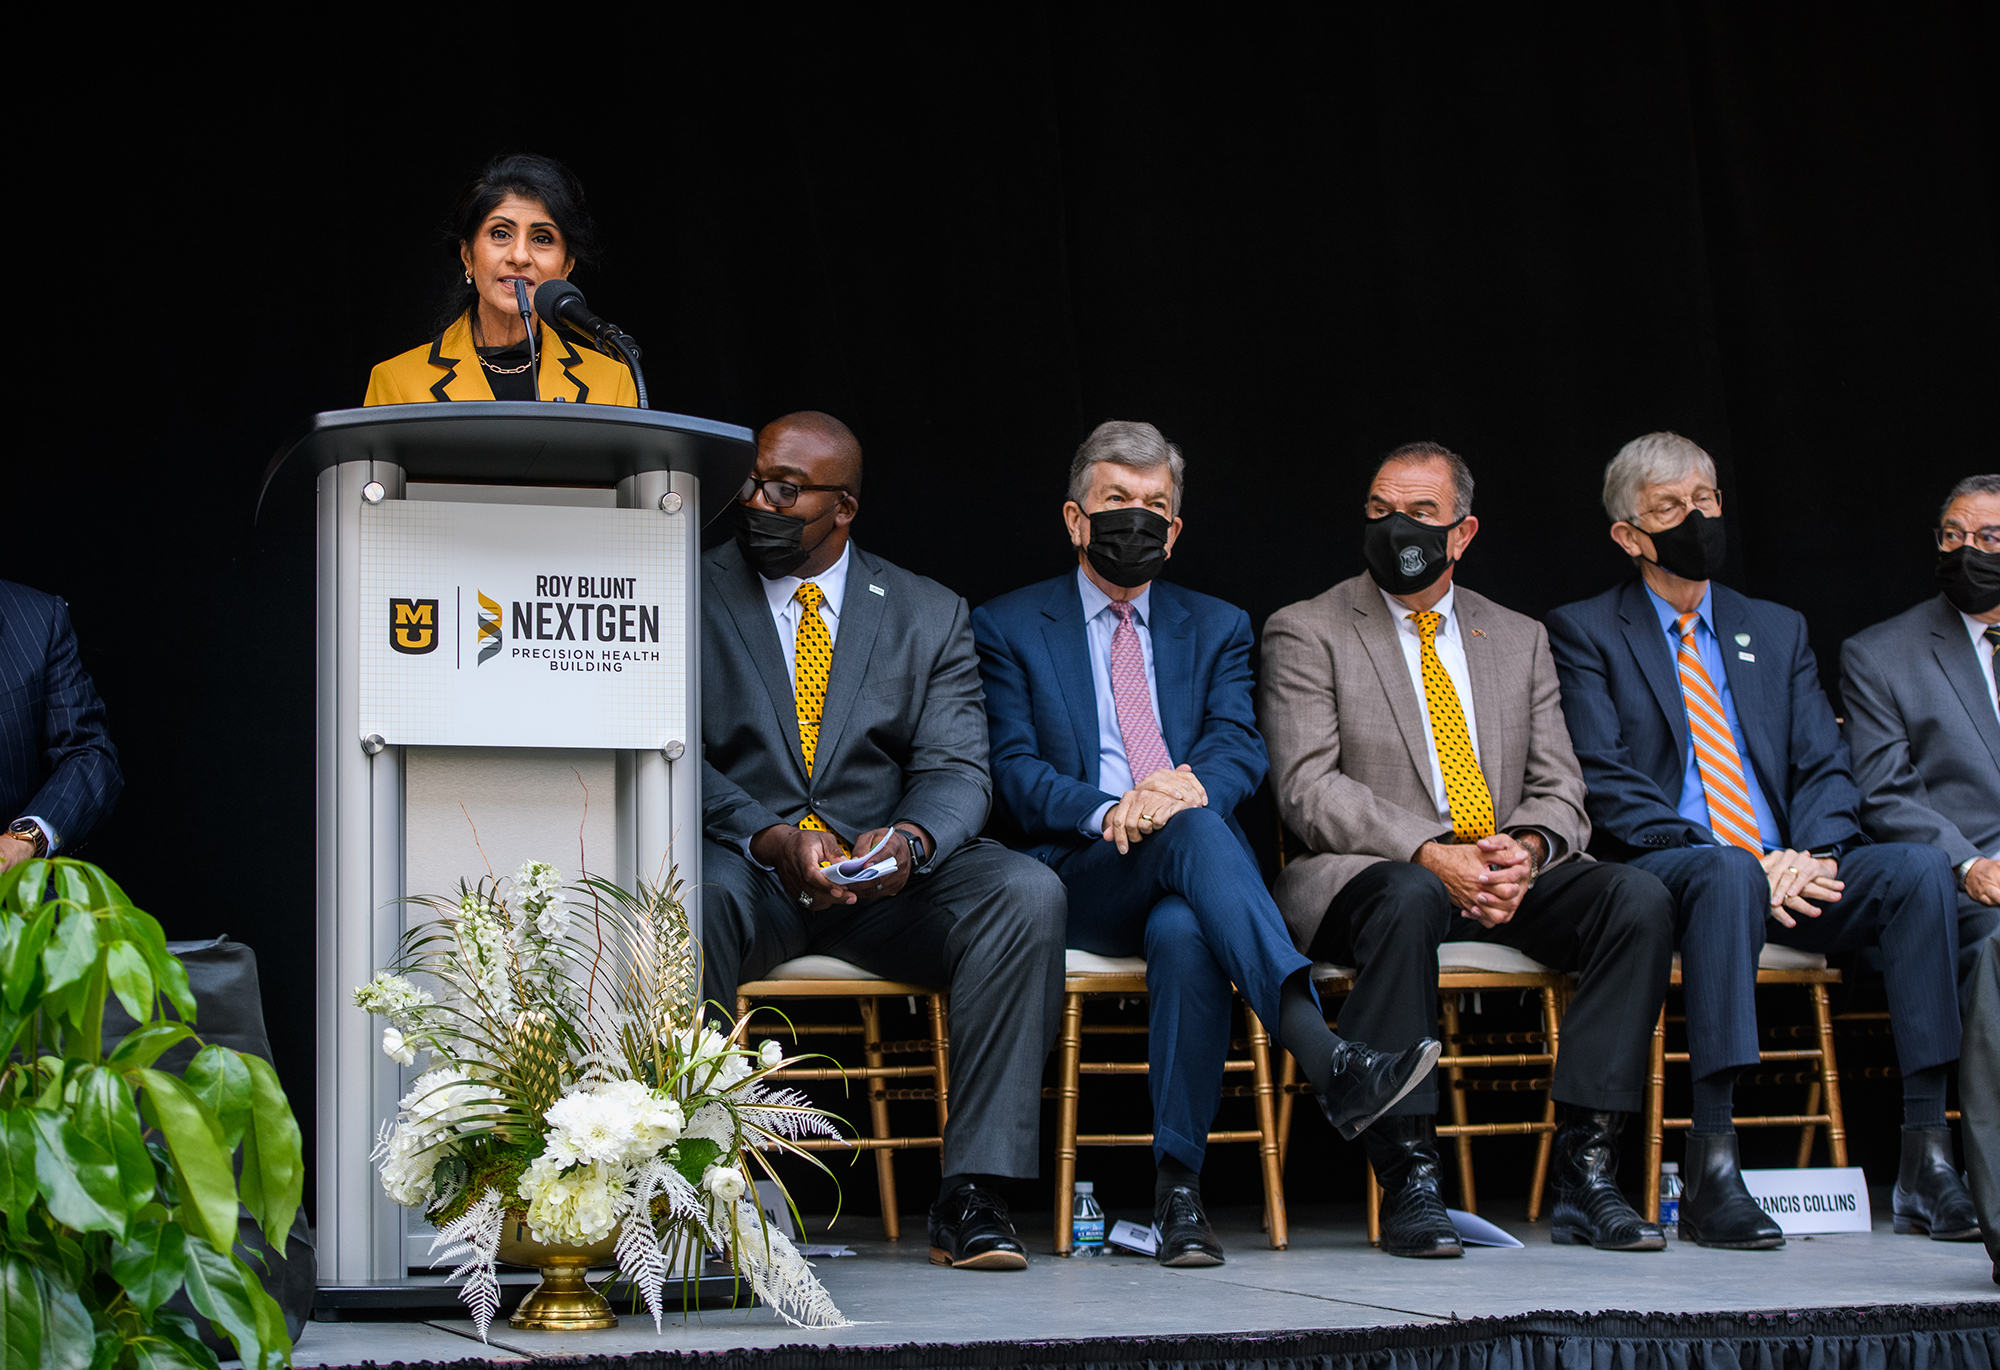 Latha Ramchand, PhD, Provost, University of Missouri, makes remarks during the Roy Blunt NextGen building Grand Opening Program on Tuesday, Oct. 19, 2021 in Columbia, Mo.